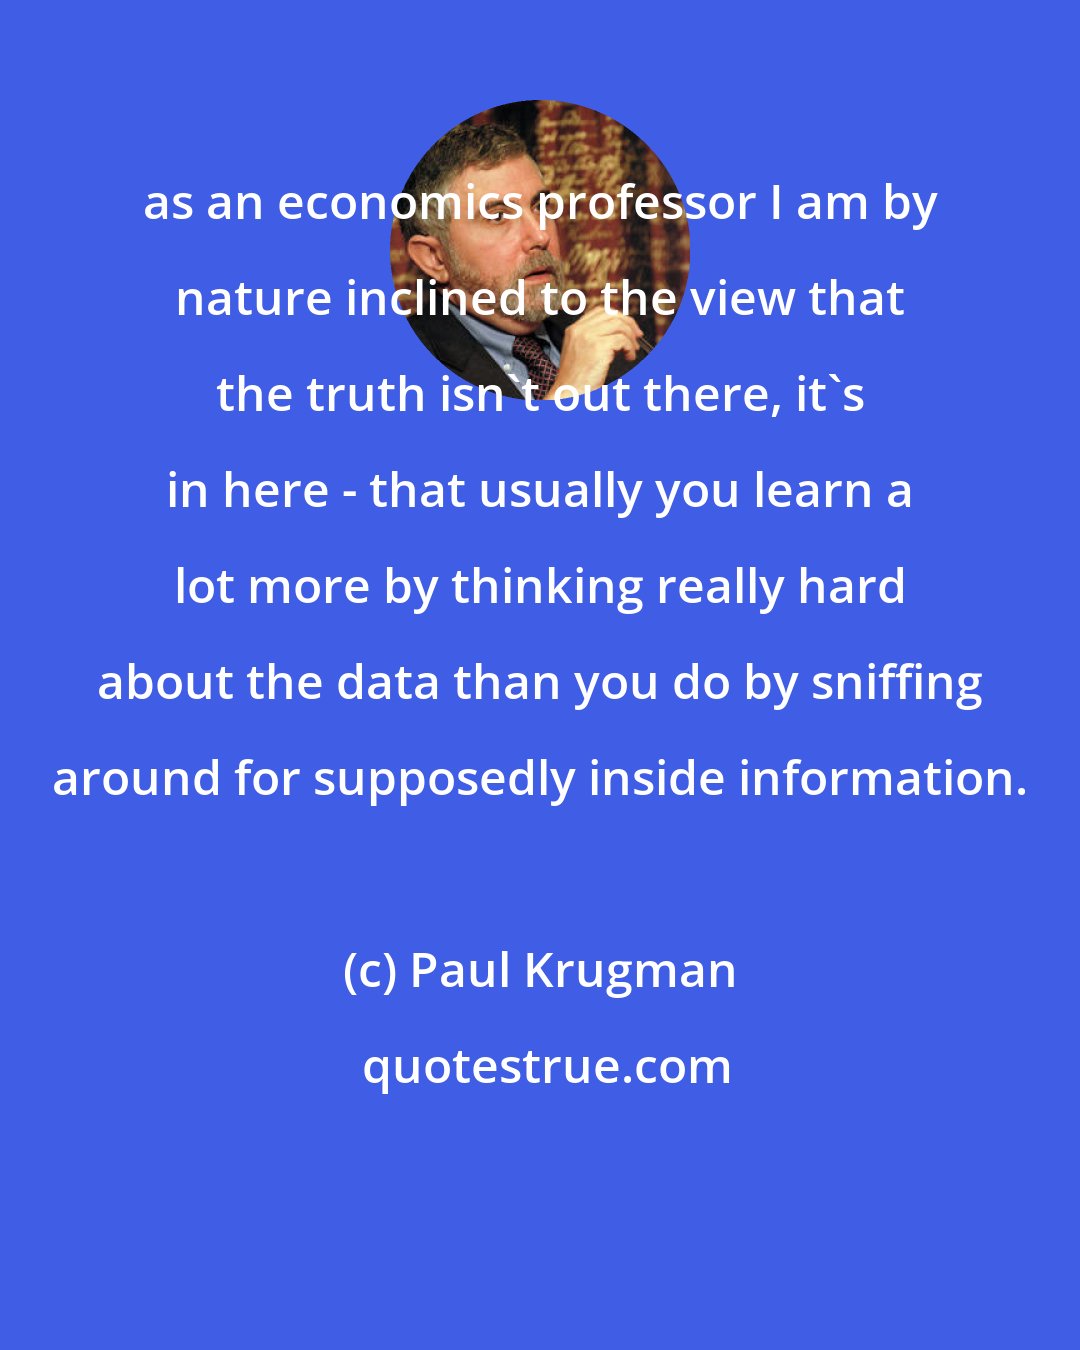 Paul Krugman: as an economics professor I am by nature inclined to the view that the truth isn't out there, it's in here - that usually you learn a lot more by thinking really hard about the data than you do by sniffing around for supposedly inside information.